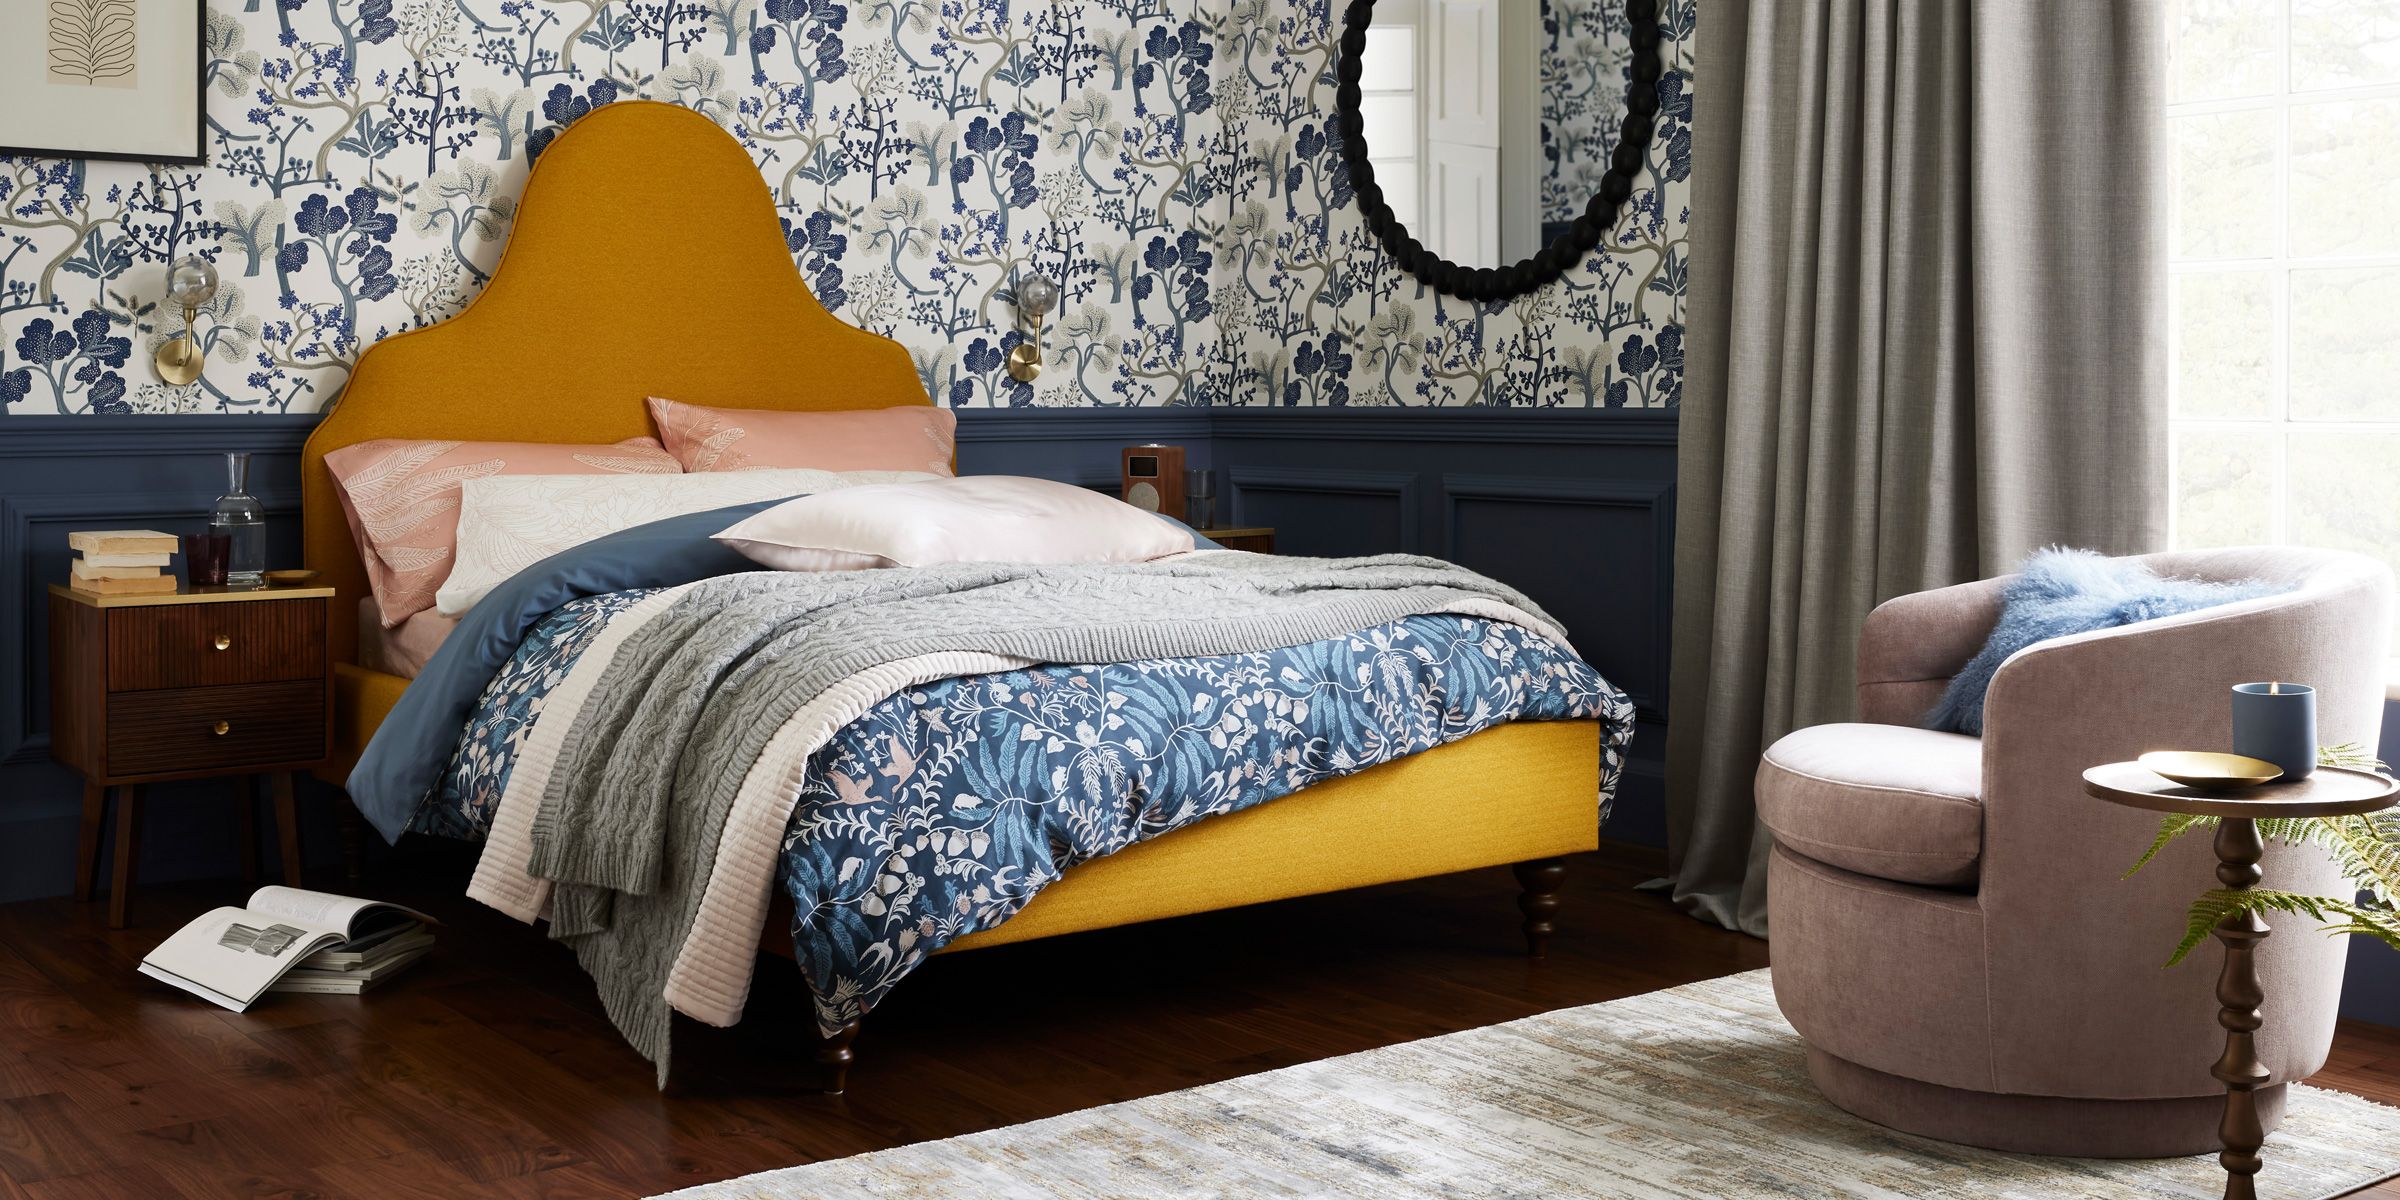 Buying Guide - bed linen